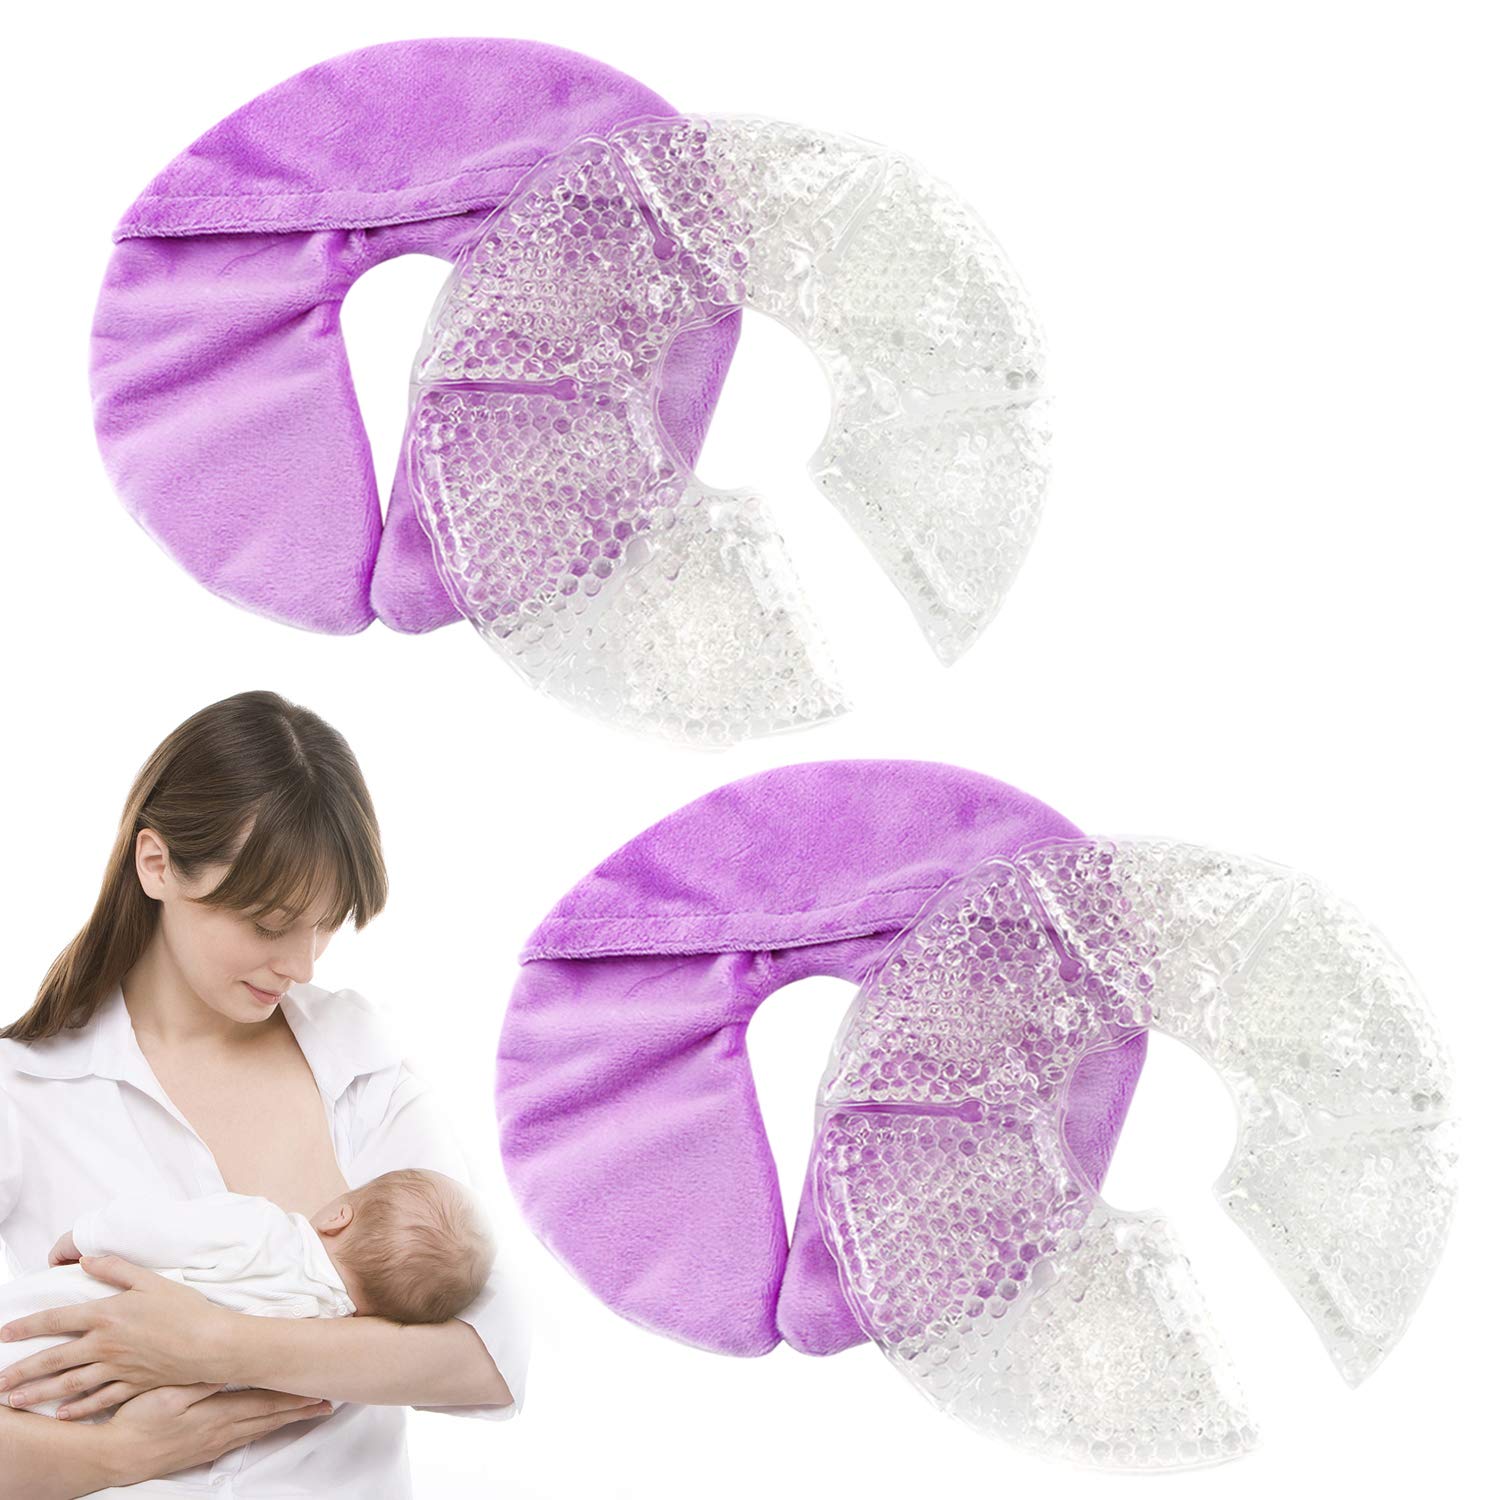 Dropship Purple Soothing Gel Pads For Breastfeeding In Section